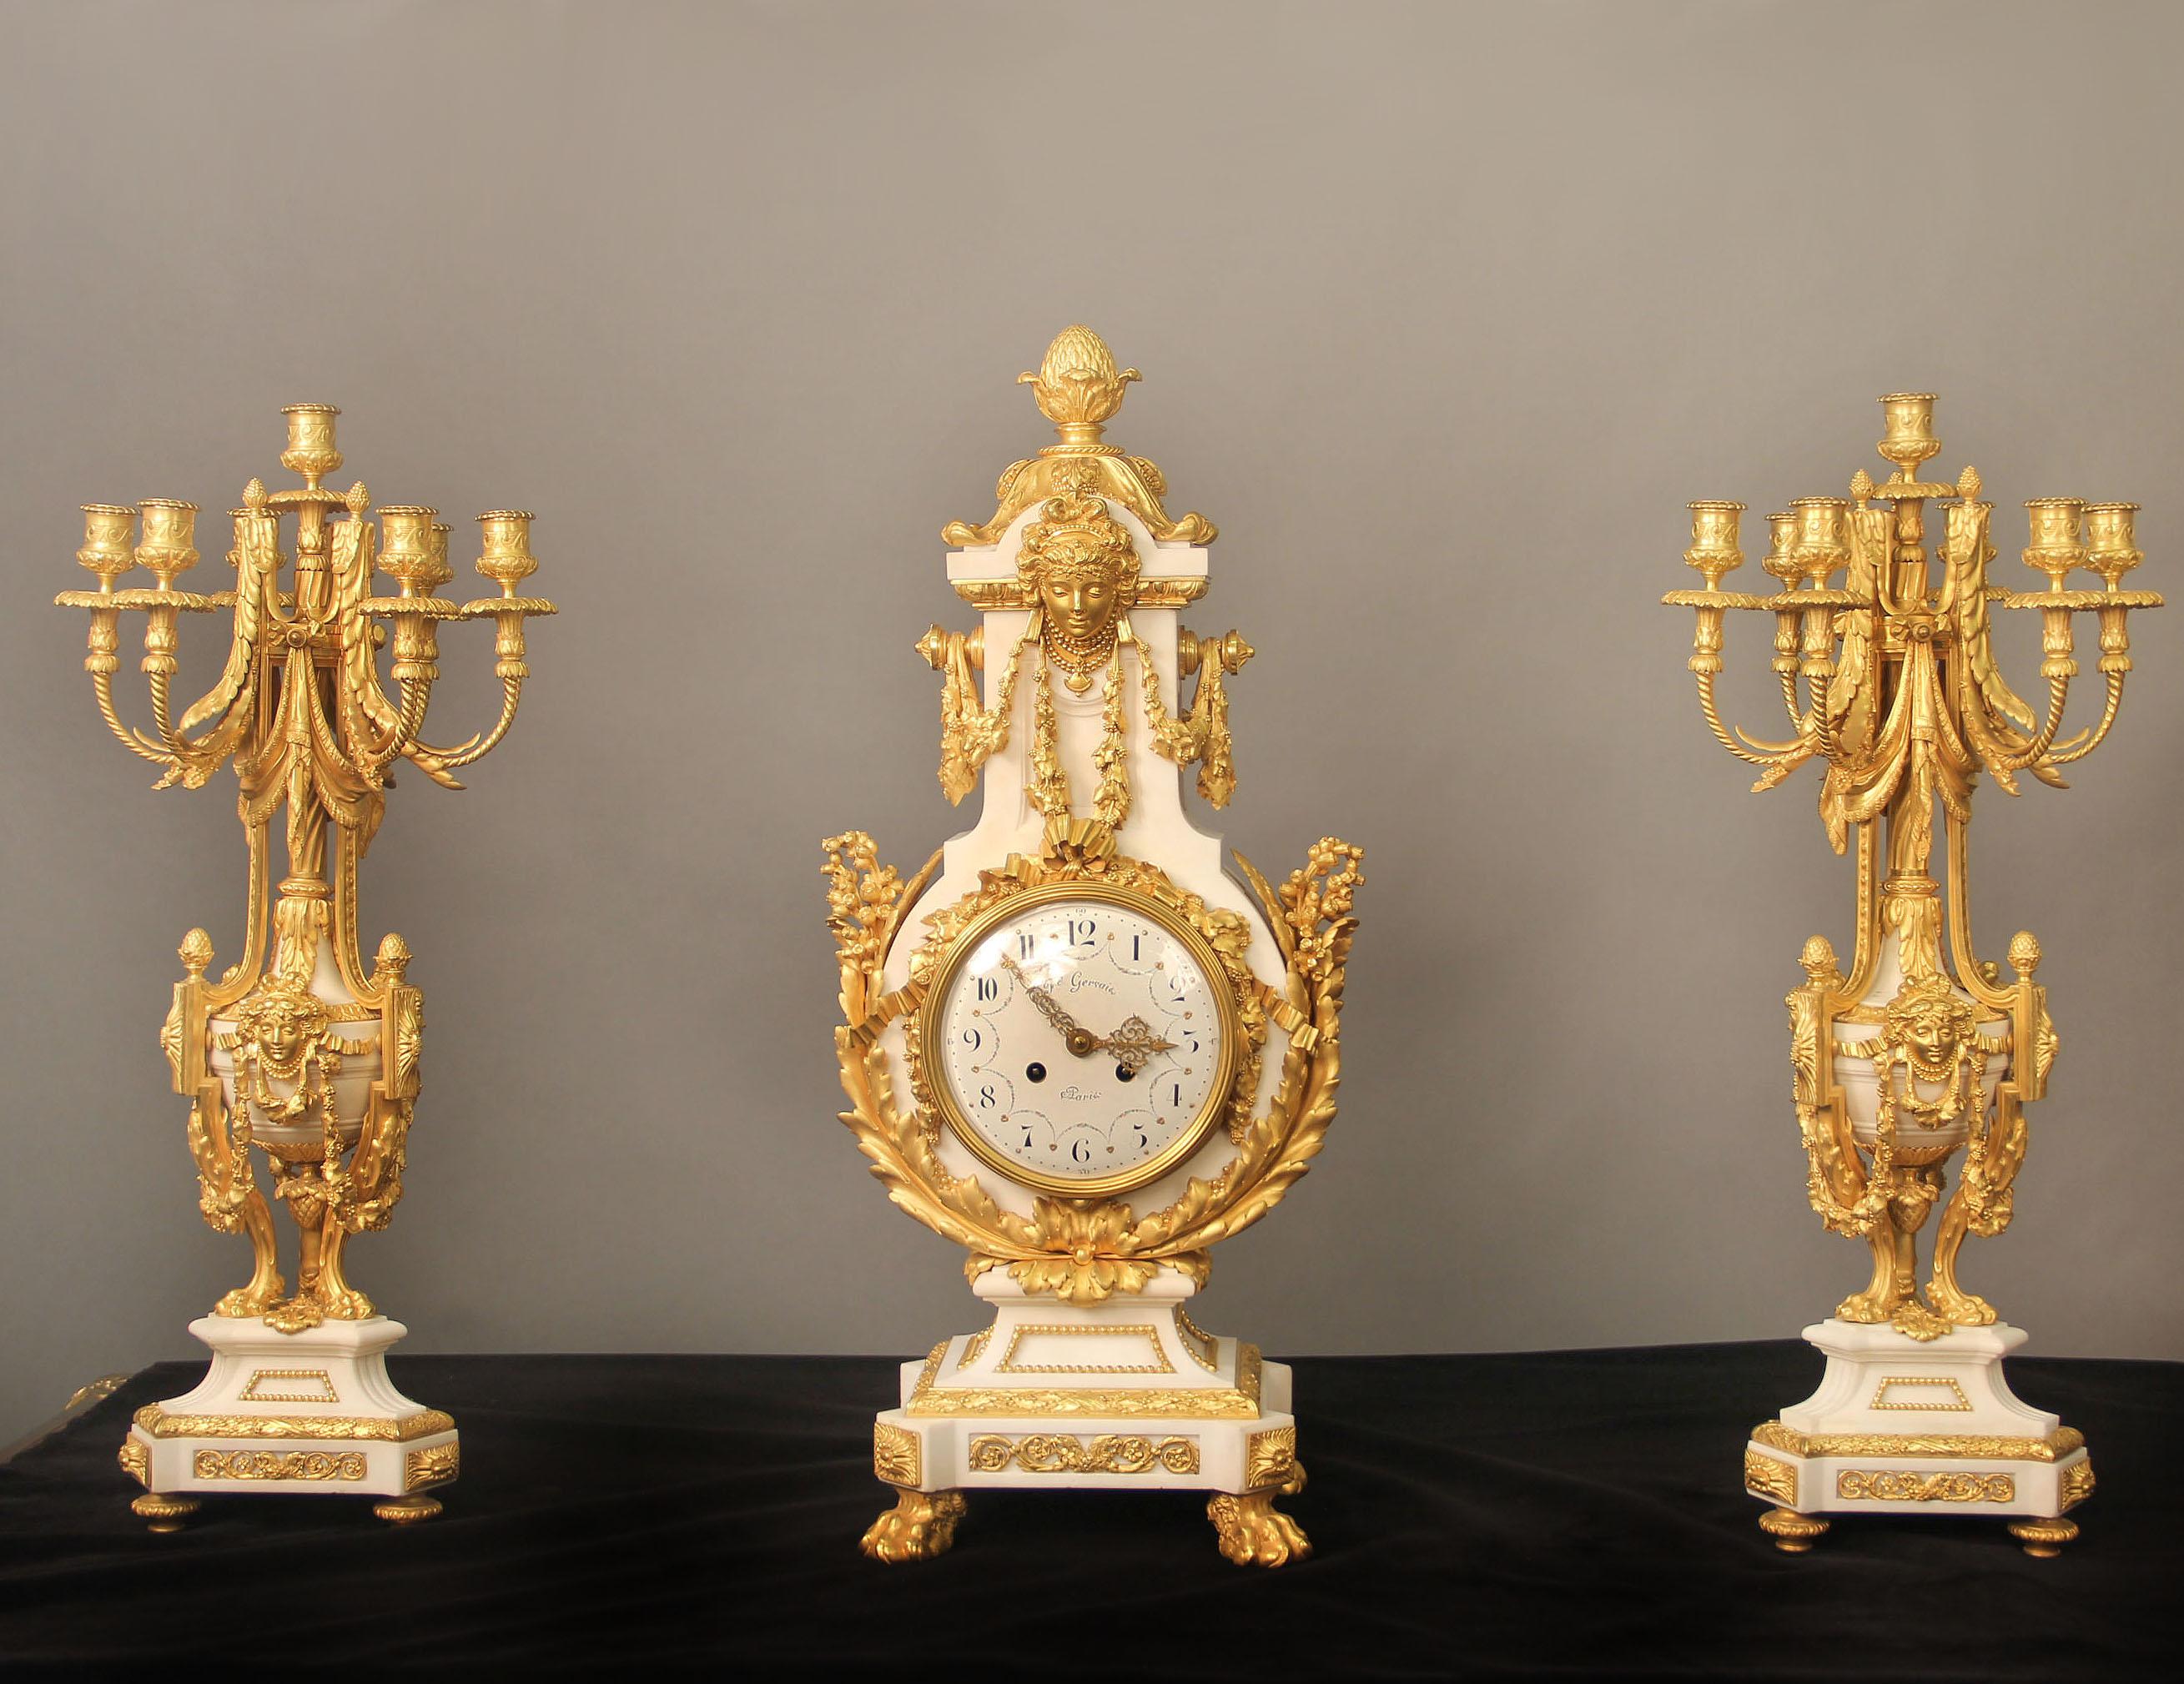 An exceptional late 19th century gilt bronze-mounted marble three-piece clock set

By Ferdinand Gervais

The lyre shaped case surrounded with bronze roses, acanthus and lilys, a large female mask with berried swags adorns the front and back of